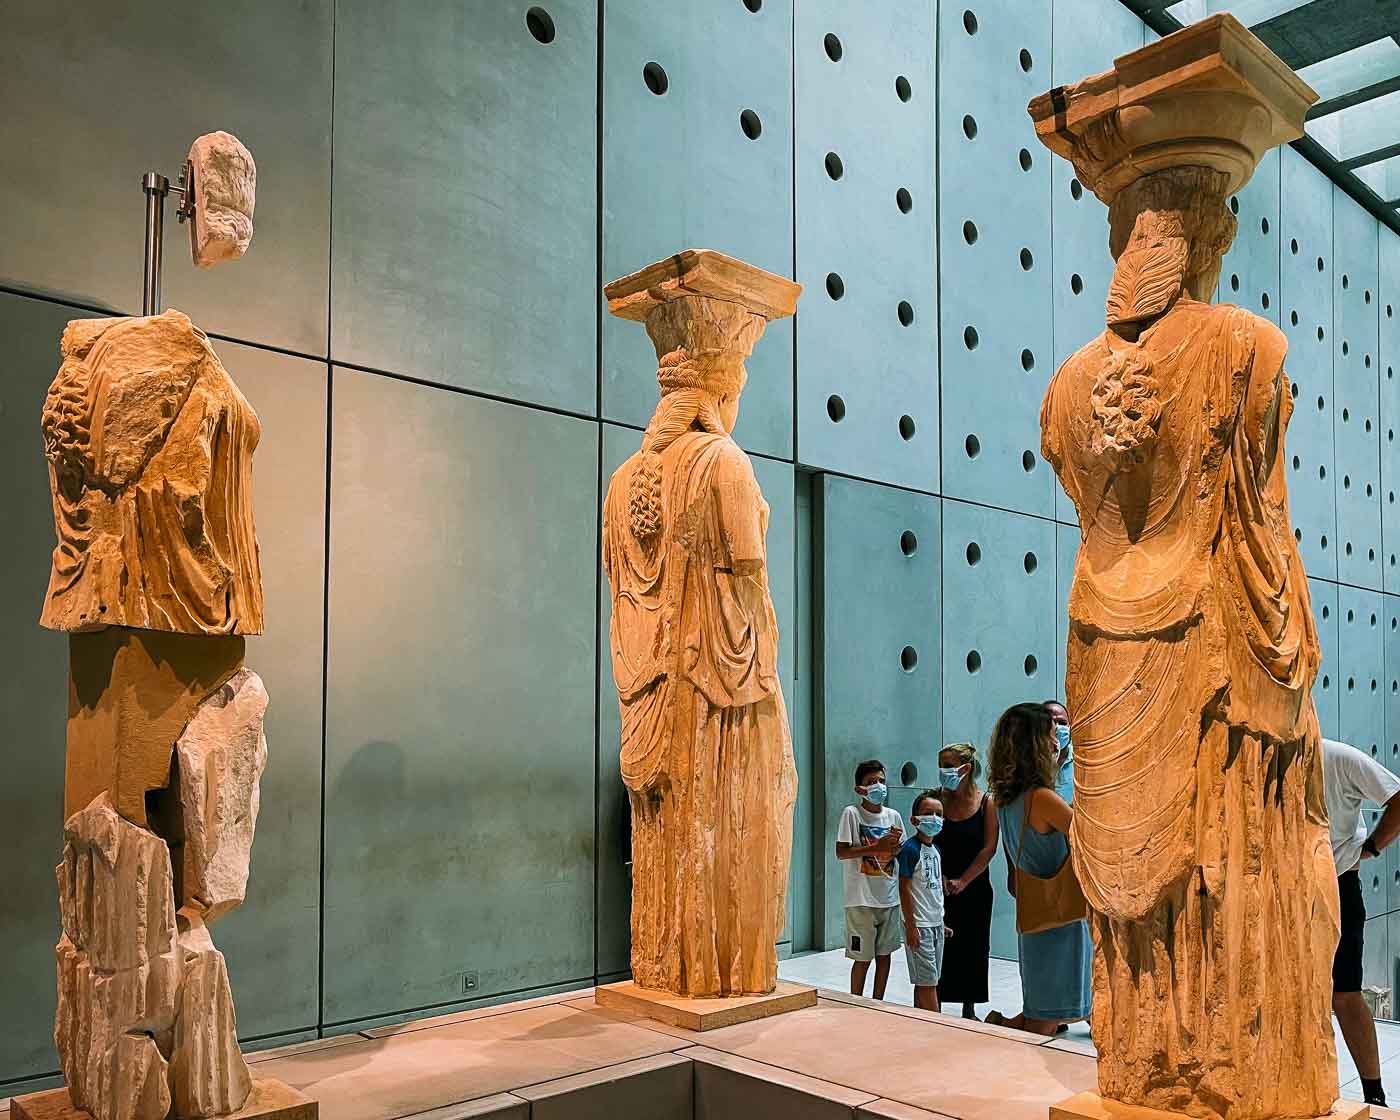 It’s time for the Acropolis Museum, a state-of-the-art treasure trove of ancient Greek art and artifacts. The exhibits are beautifully displayed, with natural light flooding the galleries, creating an ambiance that complements the ancient treasures.